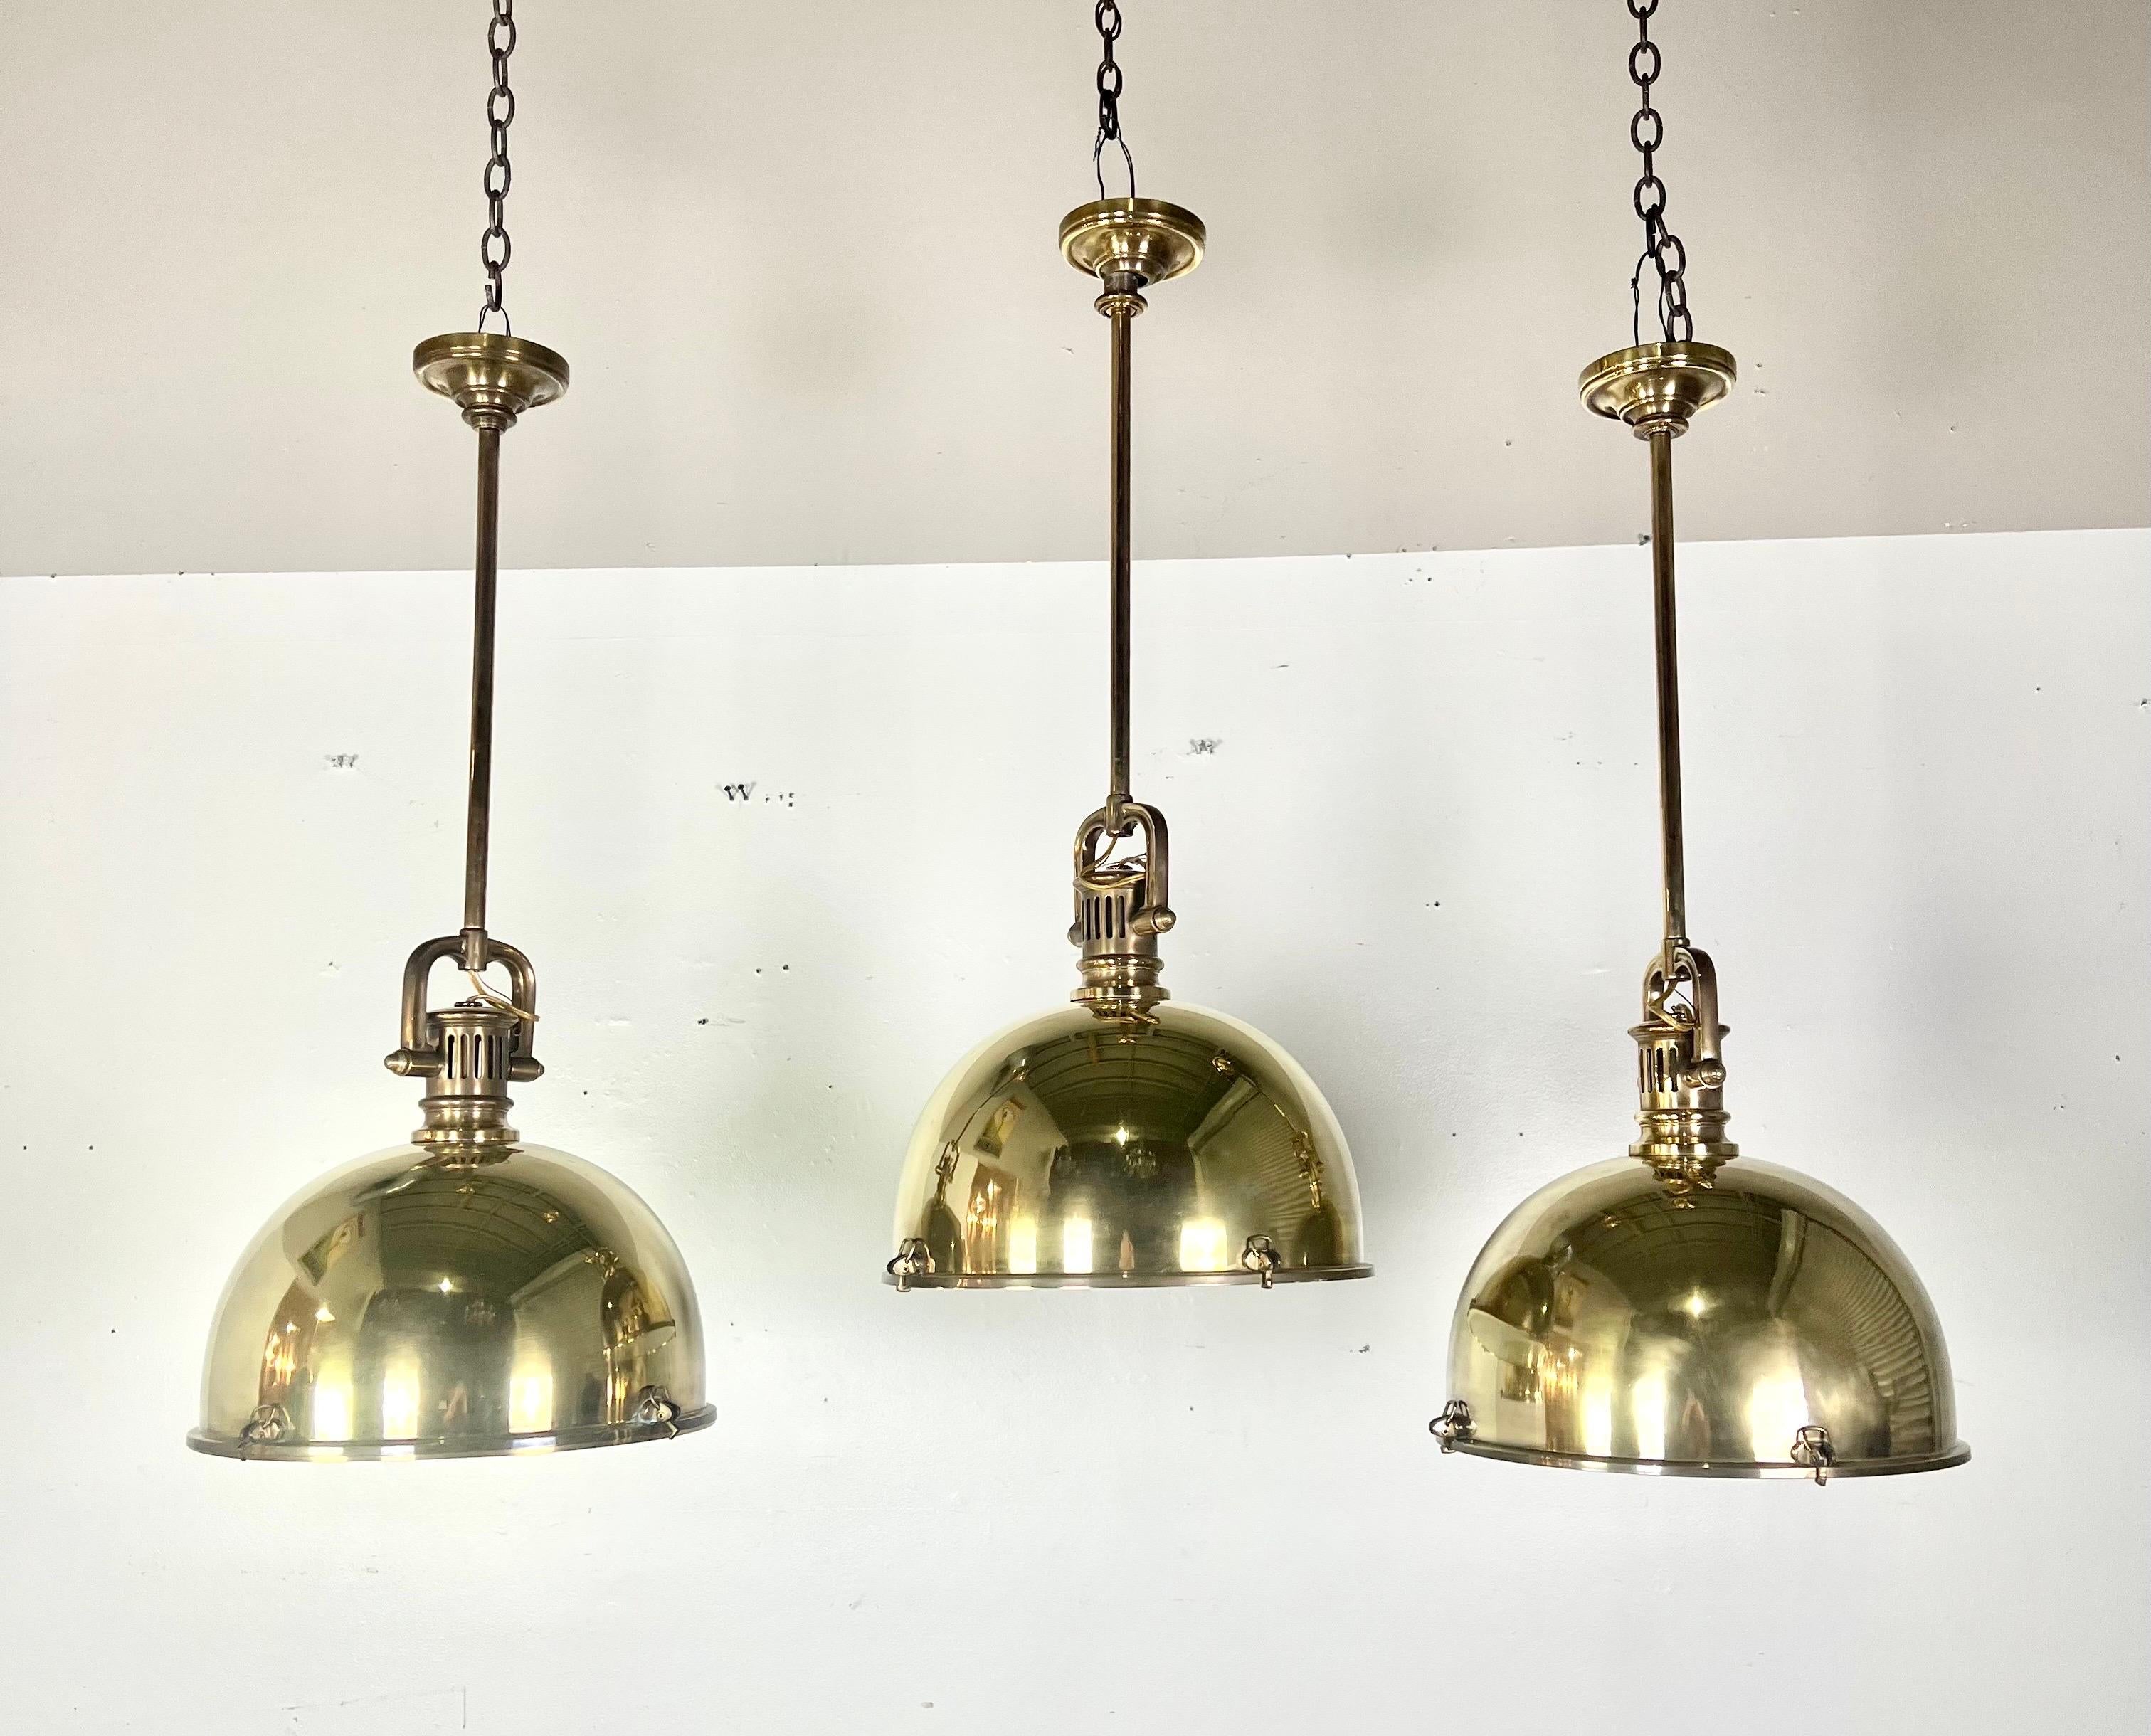 A set of three modern brass dome-shaped light pendants that are both sleek and stylish.  The use of brass adds a touch of sophistication, and the dome shape often provides a contemporary aesthetic.  They are wired and ready to install.